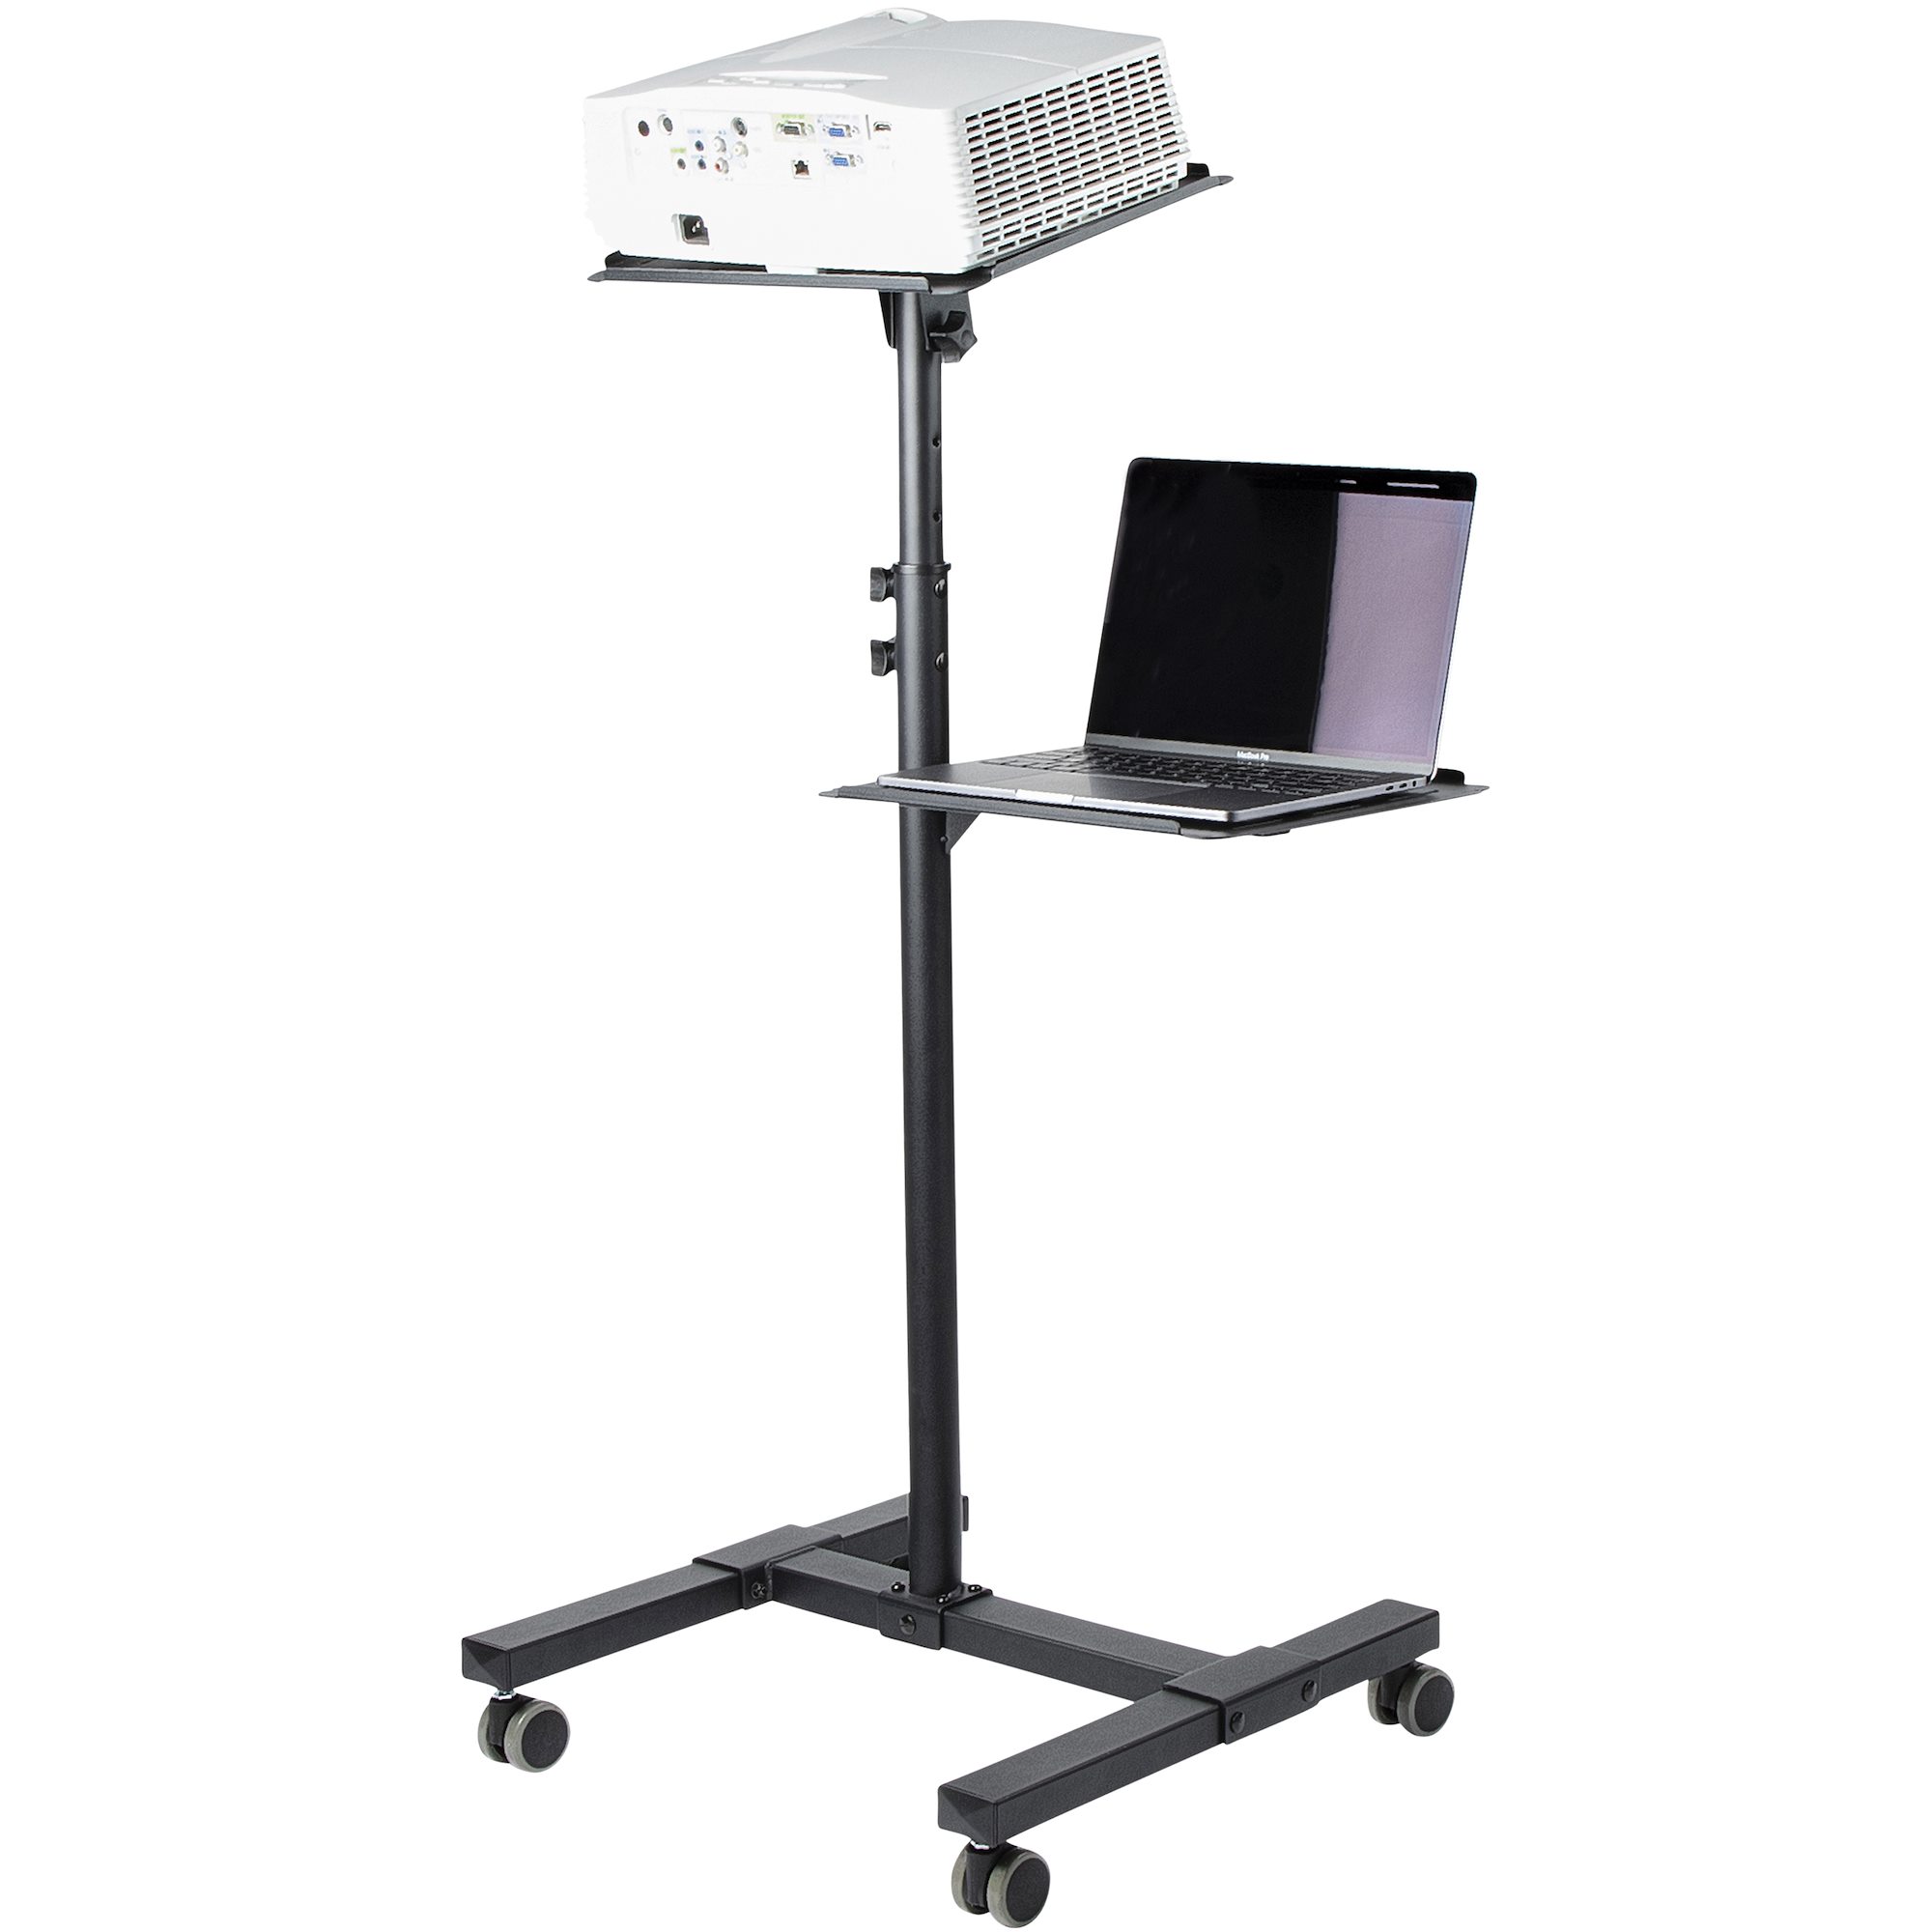 Mobile Projector and Laptop Stand/Cart - Heavy Duty Portable Projector  Stand (2 Shelves, hold 22lb/10kg each) - Height Adjustable Rolling  Presentation 